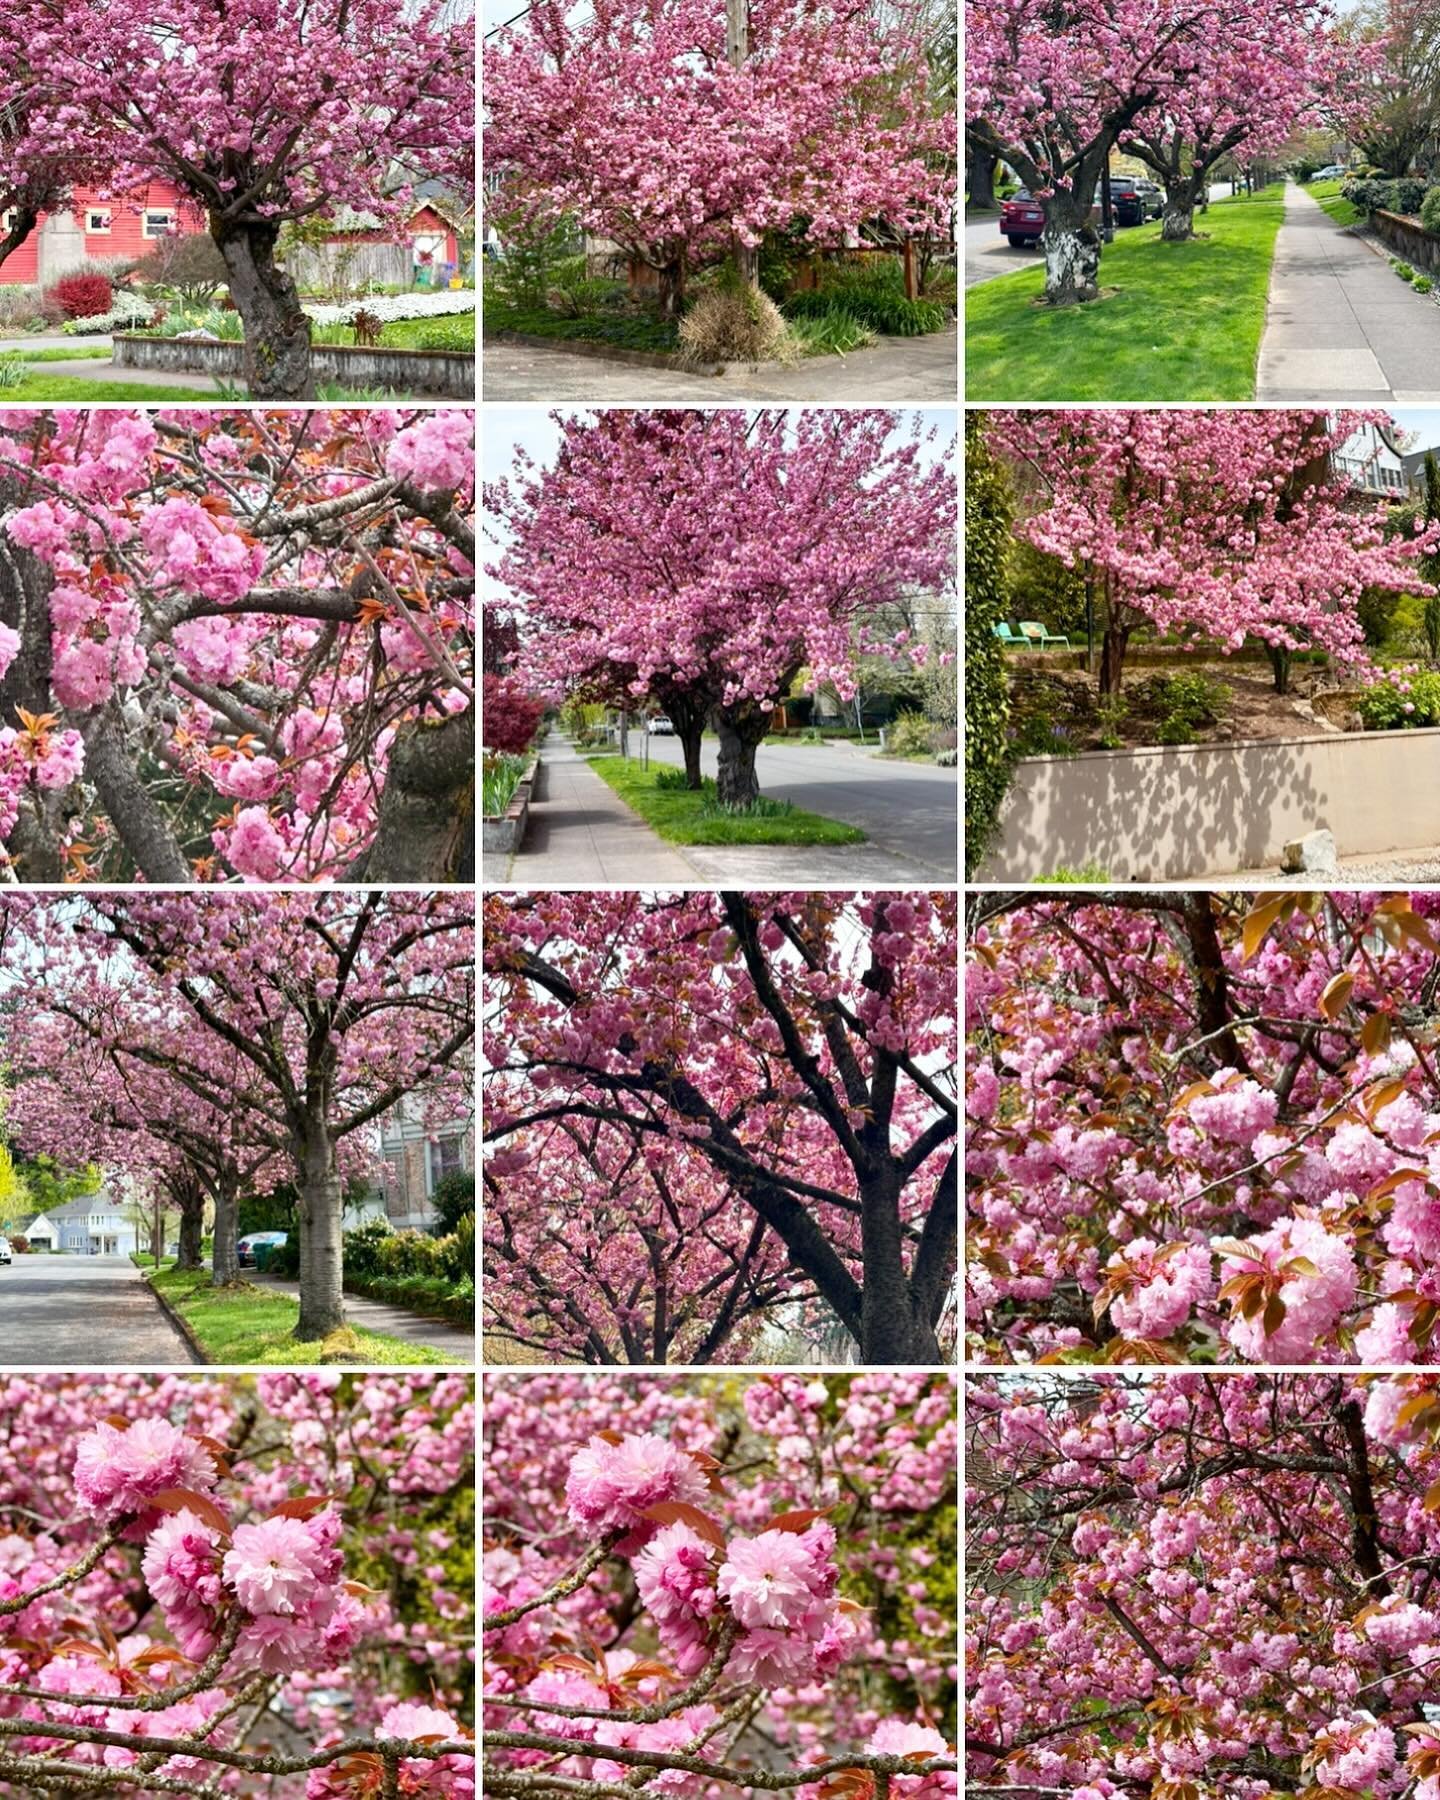 Springtime in Portland means a riot of pink cherry blossoms. Literally every block in Northeast Portland has at least one of these beauties&hellip; including ours! (See last photo for a look out our front door.) Prunus serrulata&lsquo;Kwanzan&rsquo; 